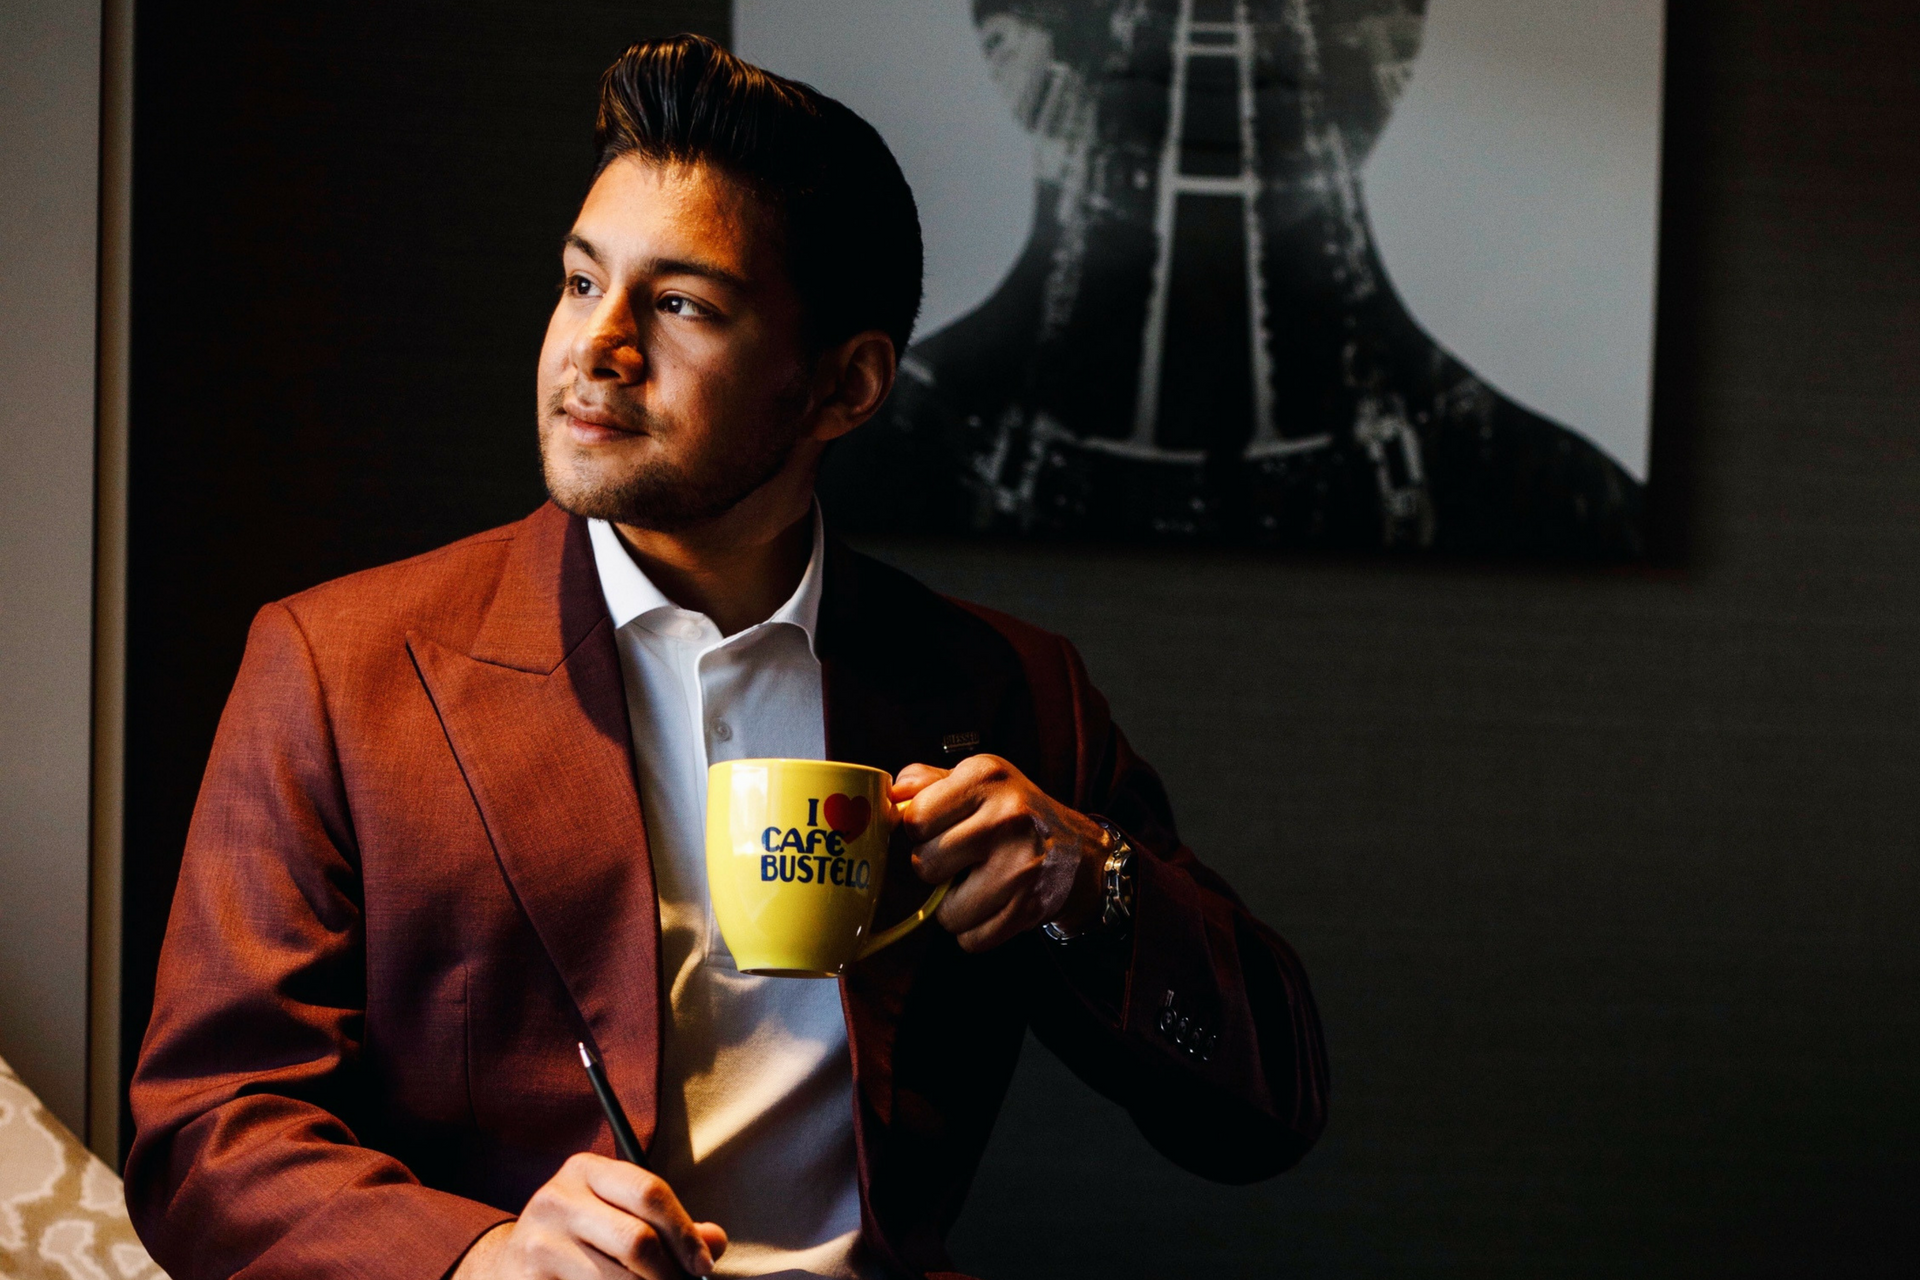 Café Bustelo Will Award $50,000 in Scholarships to Latino Students Nationwide